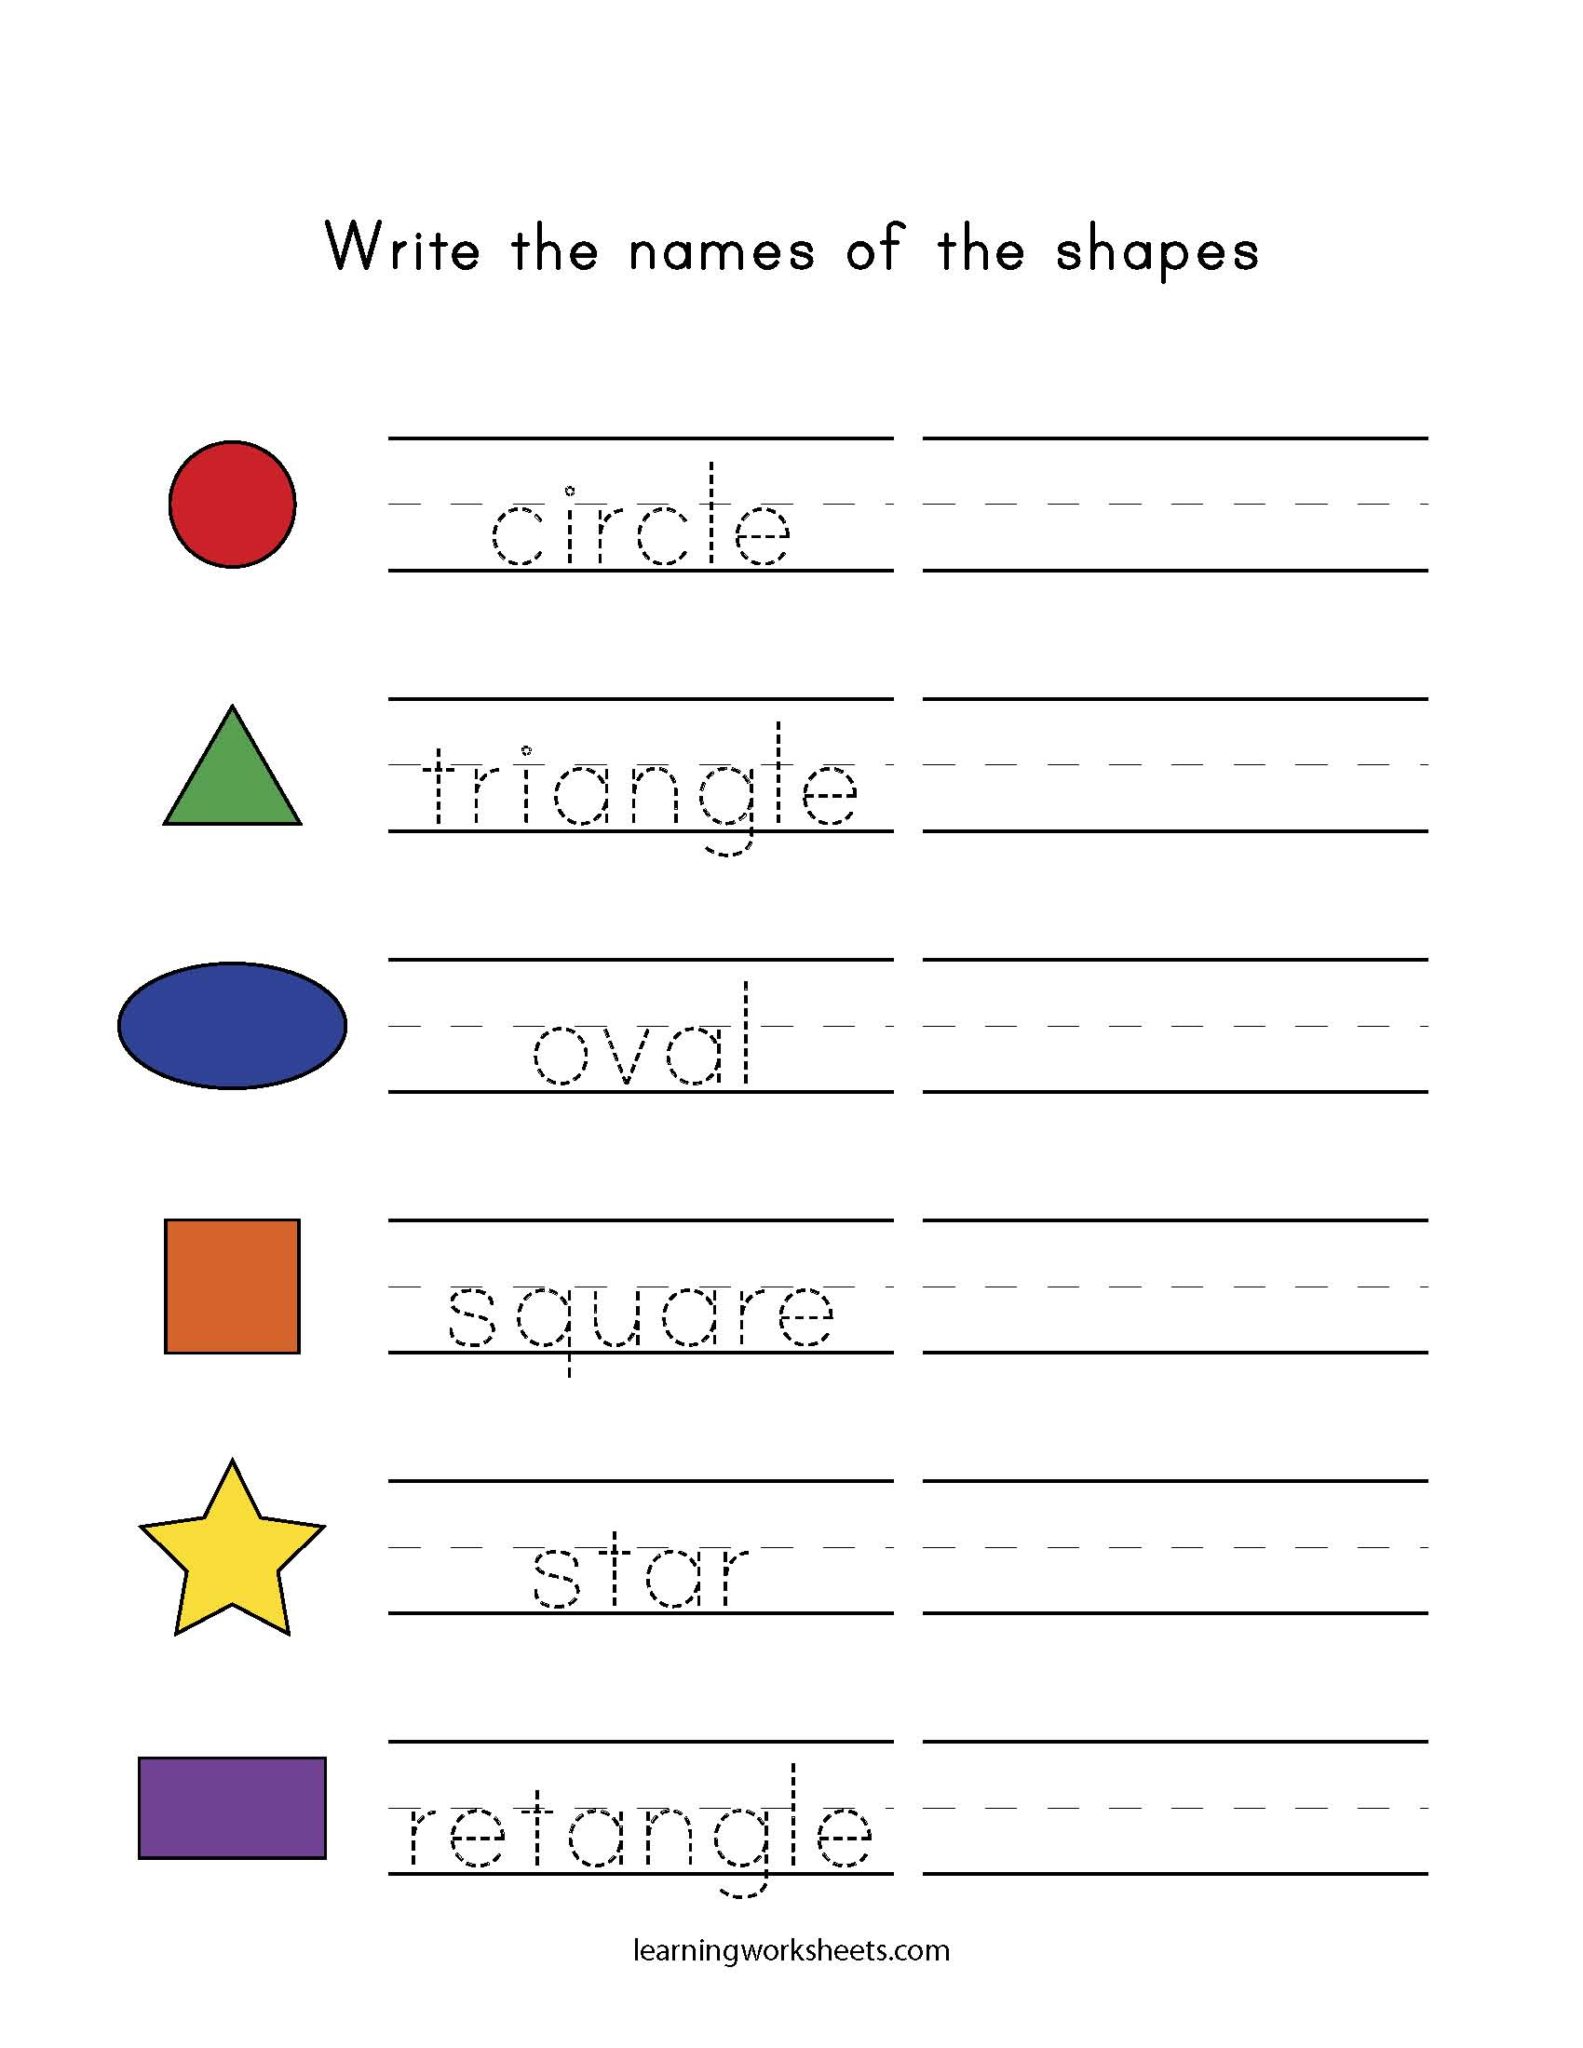 name of shapes